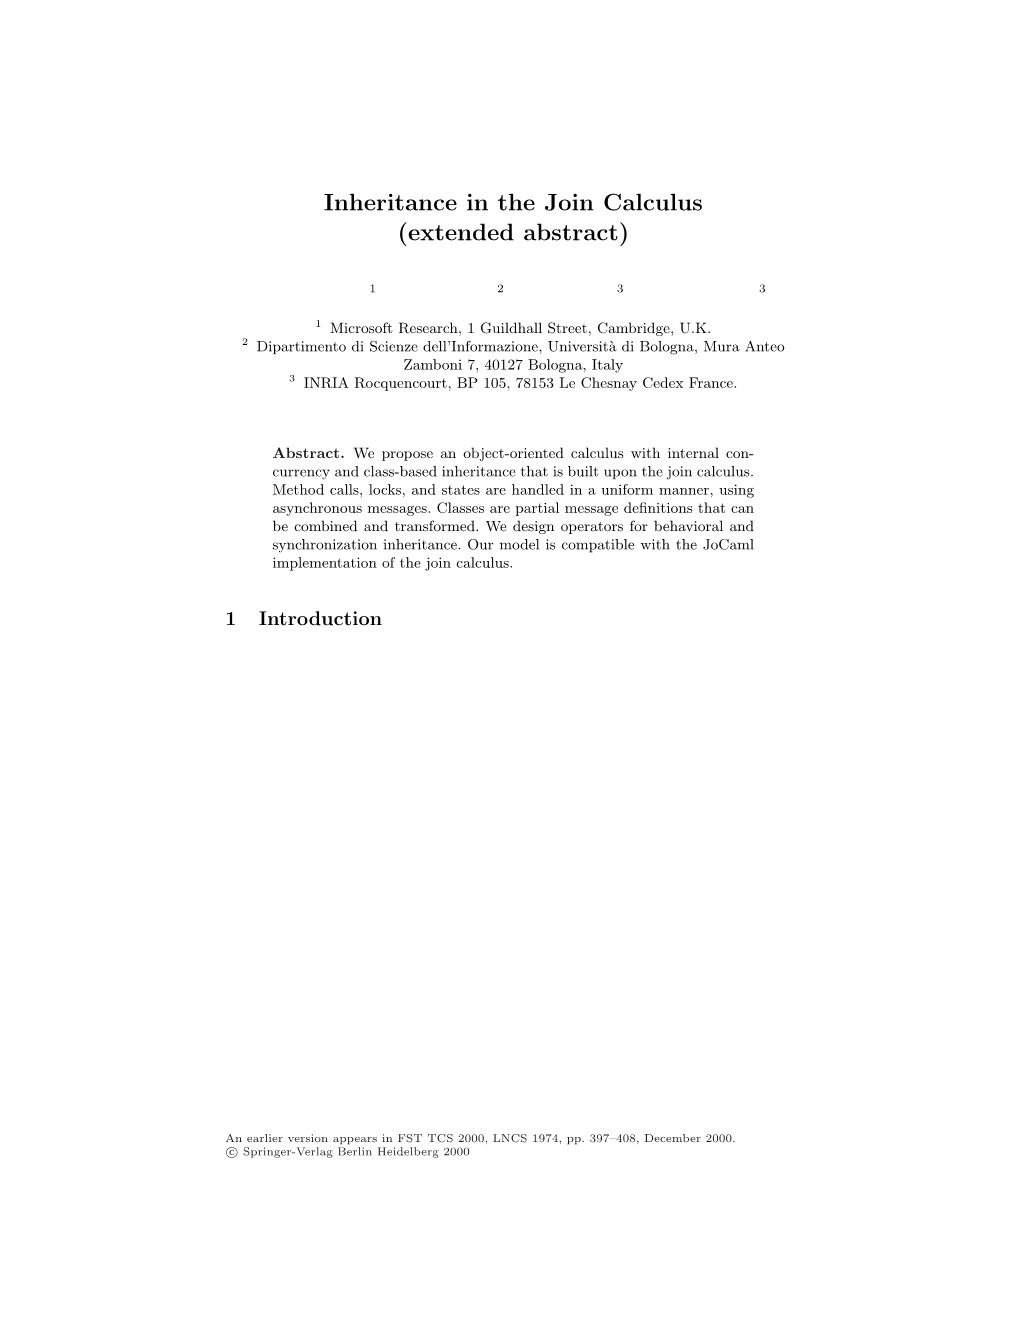 Inheritance in the Join Calculus (Extended Abstract)